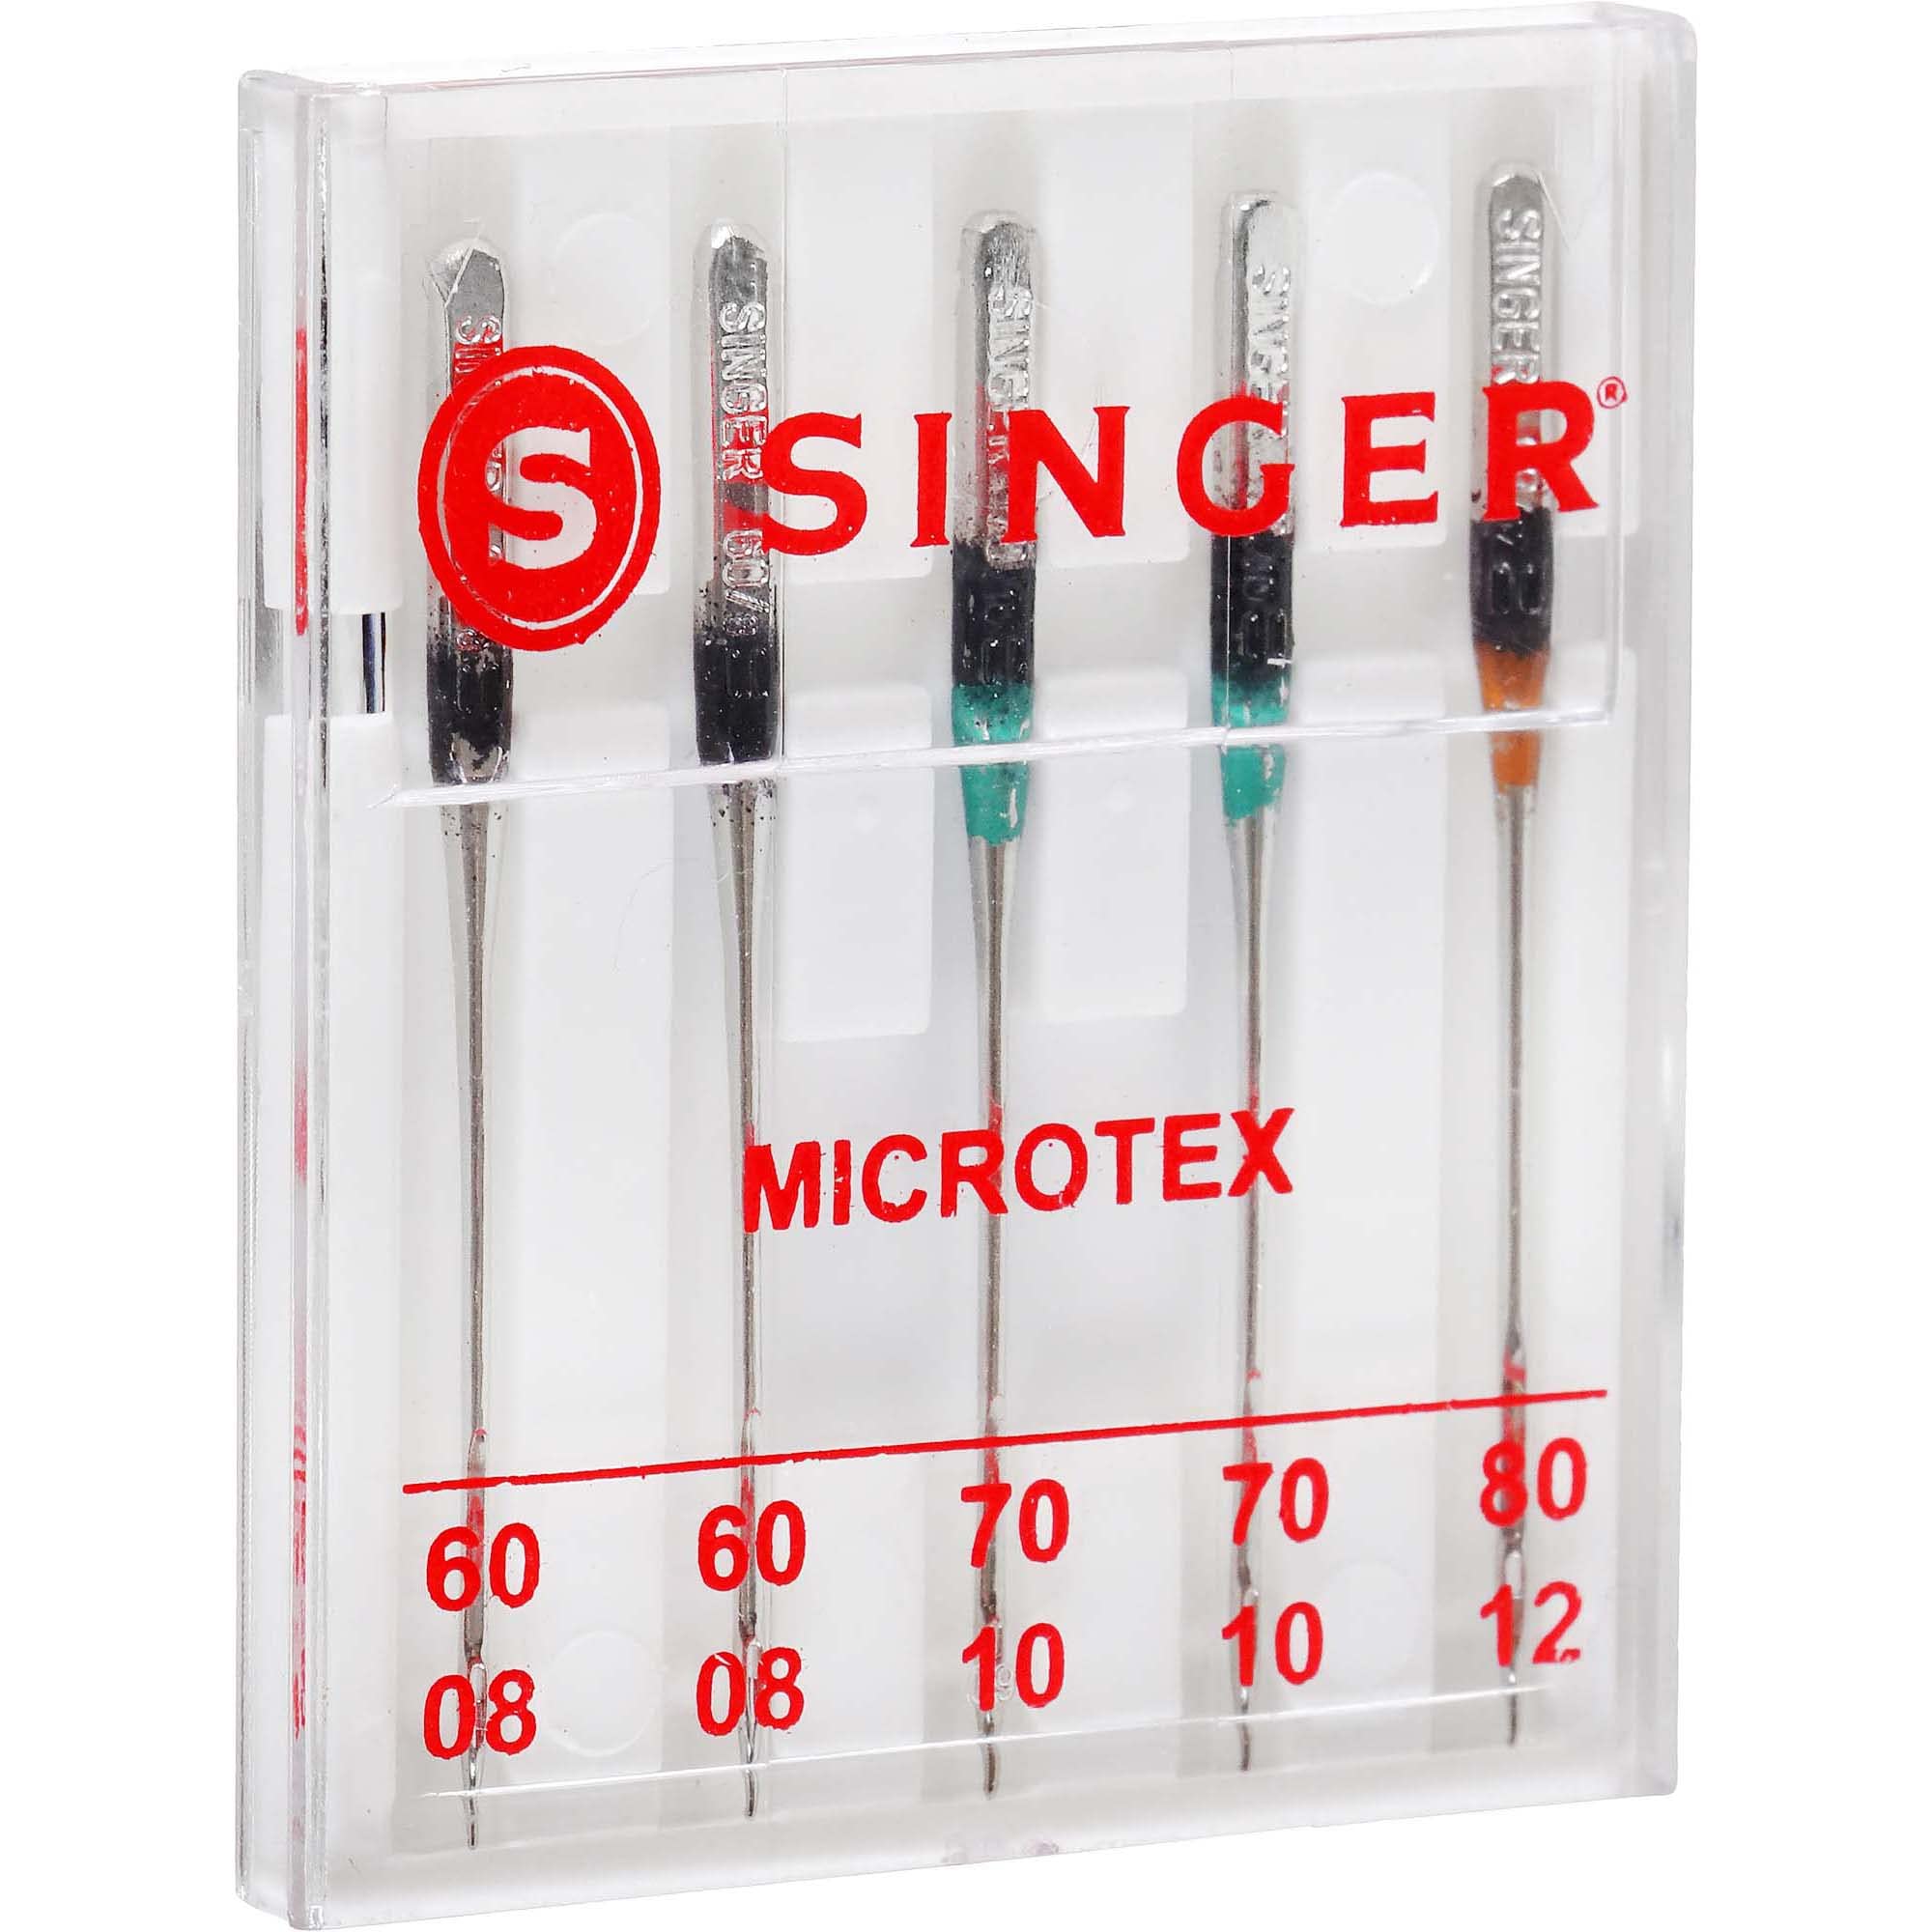 SINGER 04708 Assorted Universal Microtex Sewing Machine Needles, Sizes 60/8, 70/09, 80/11, 5-Count (Packaging May Vary)